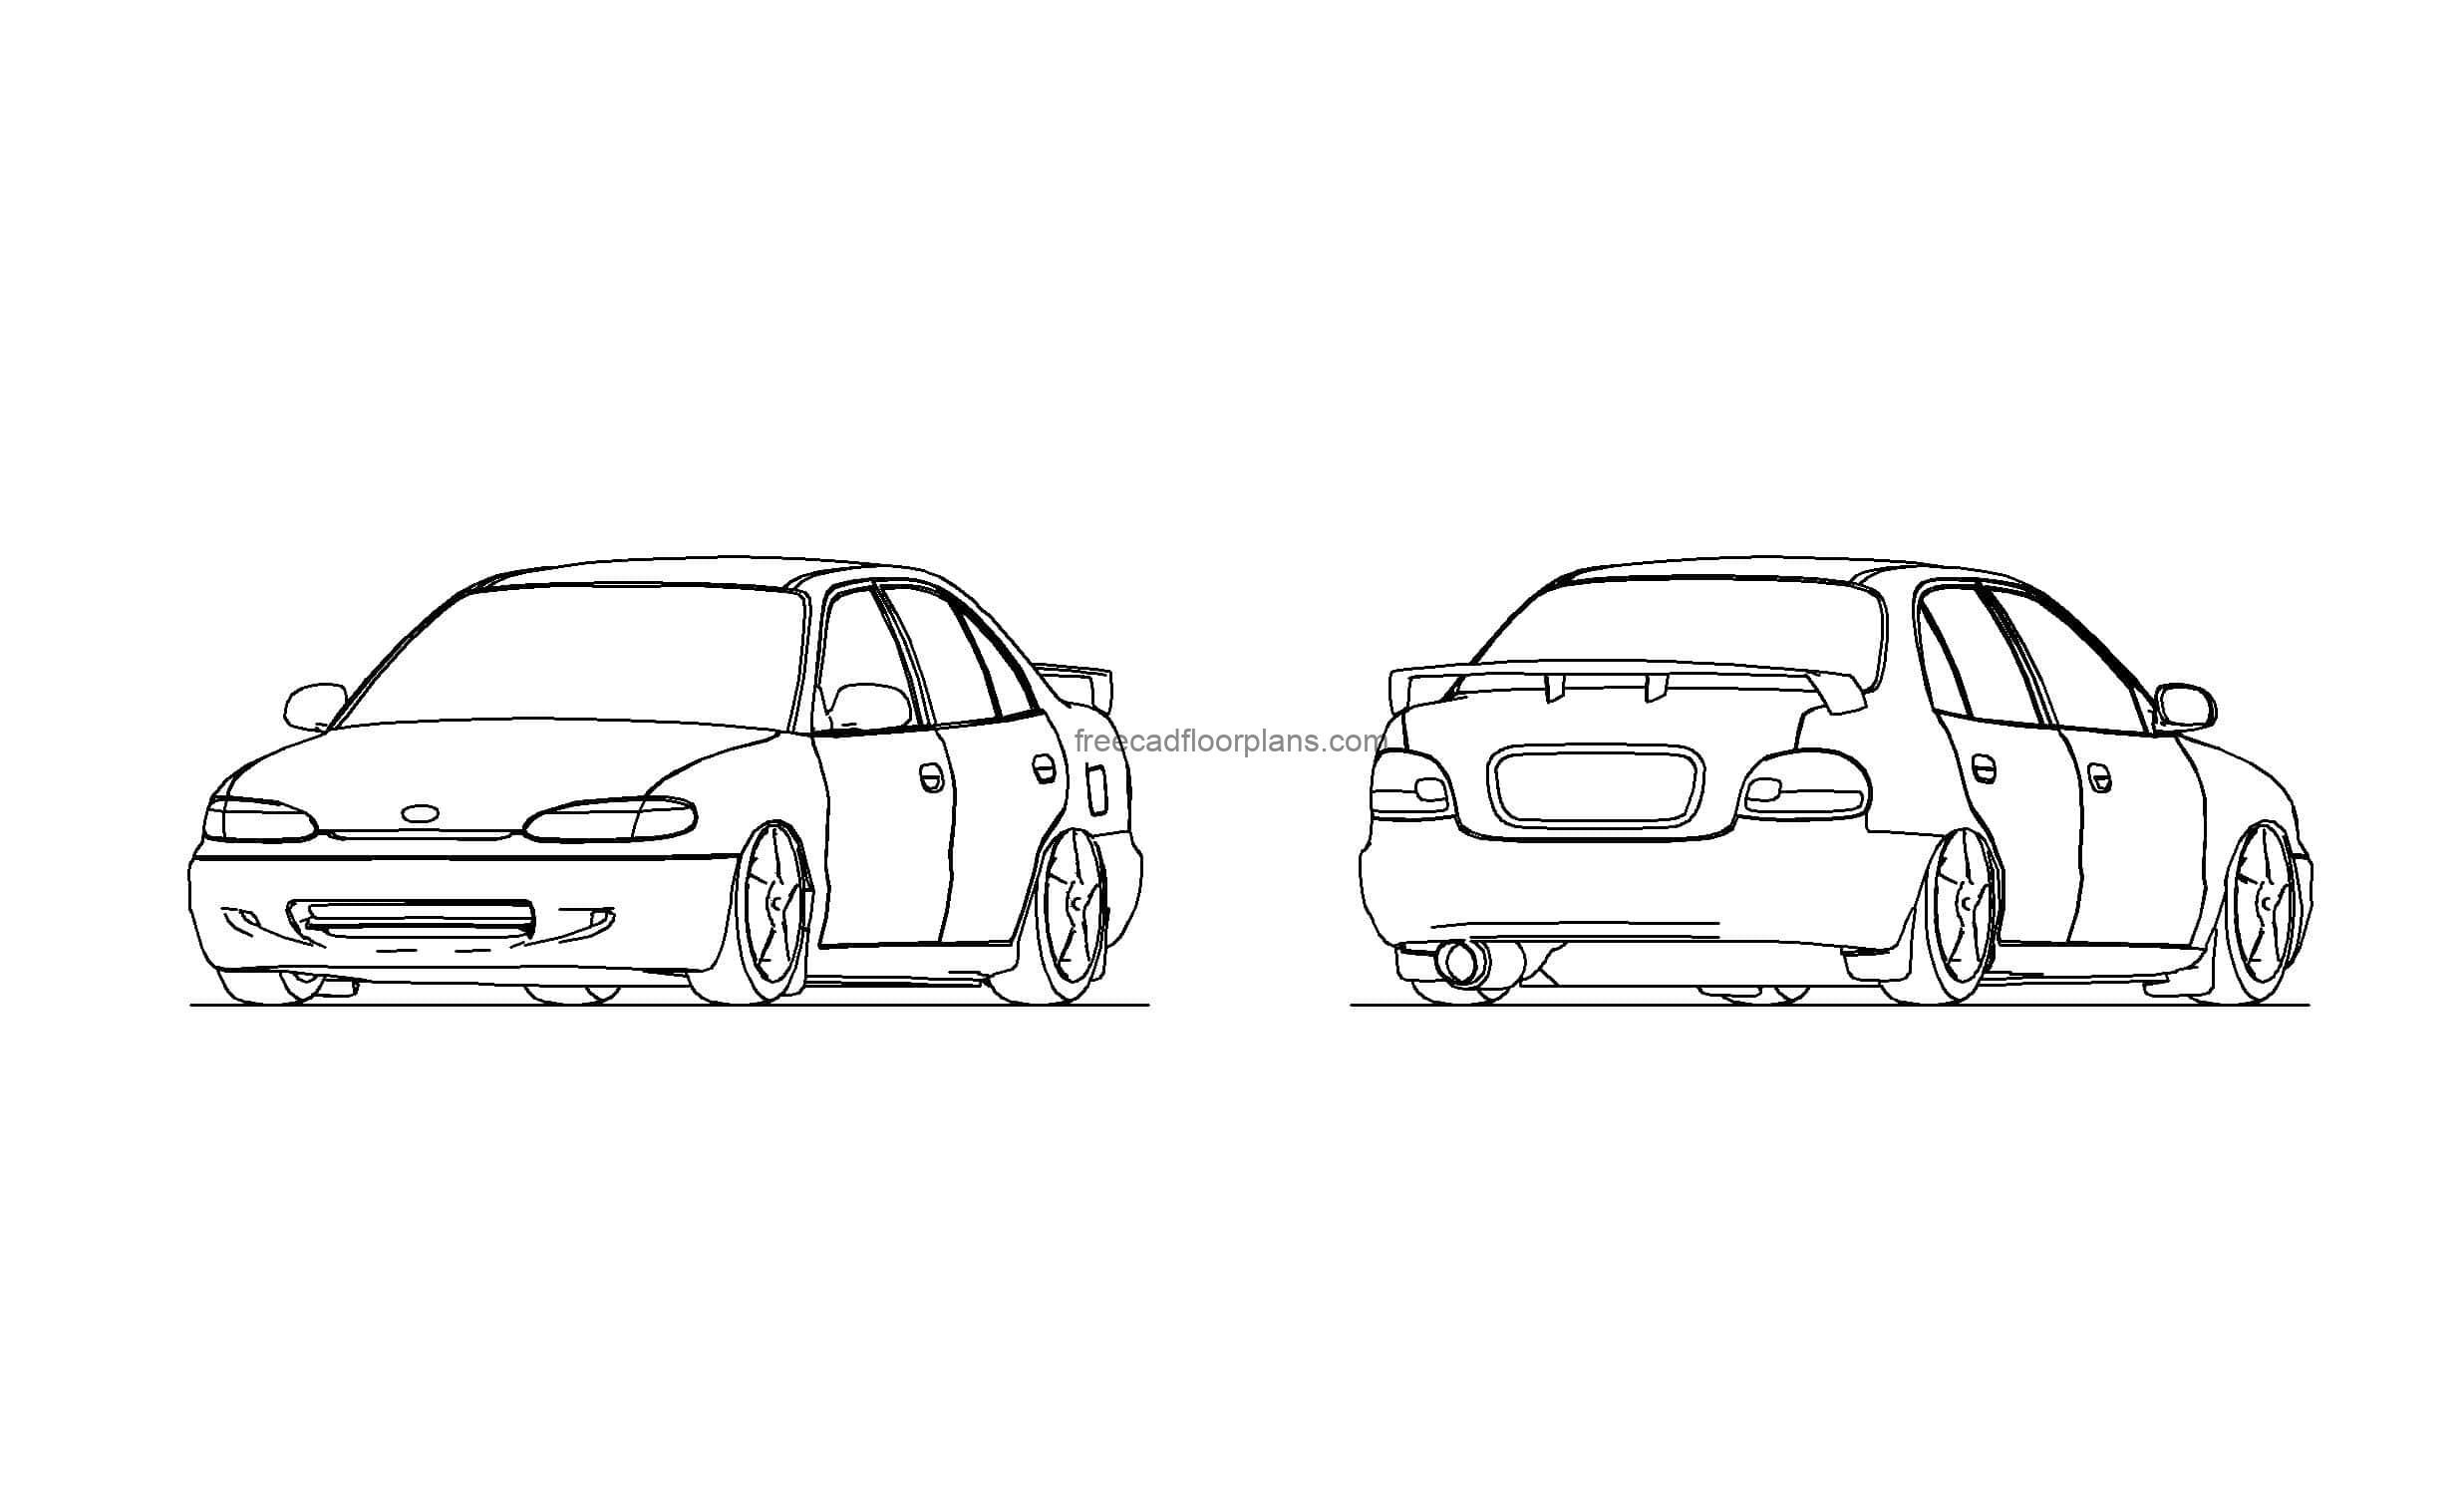 autocad drawing of a angled car back and front views, dwg file free for download